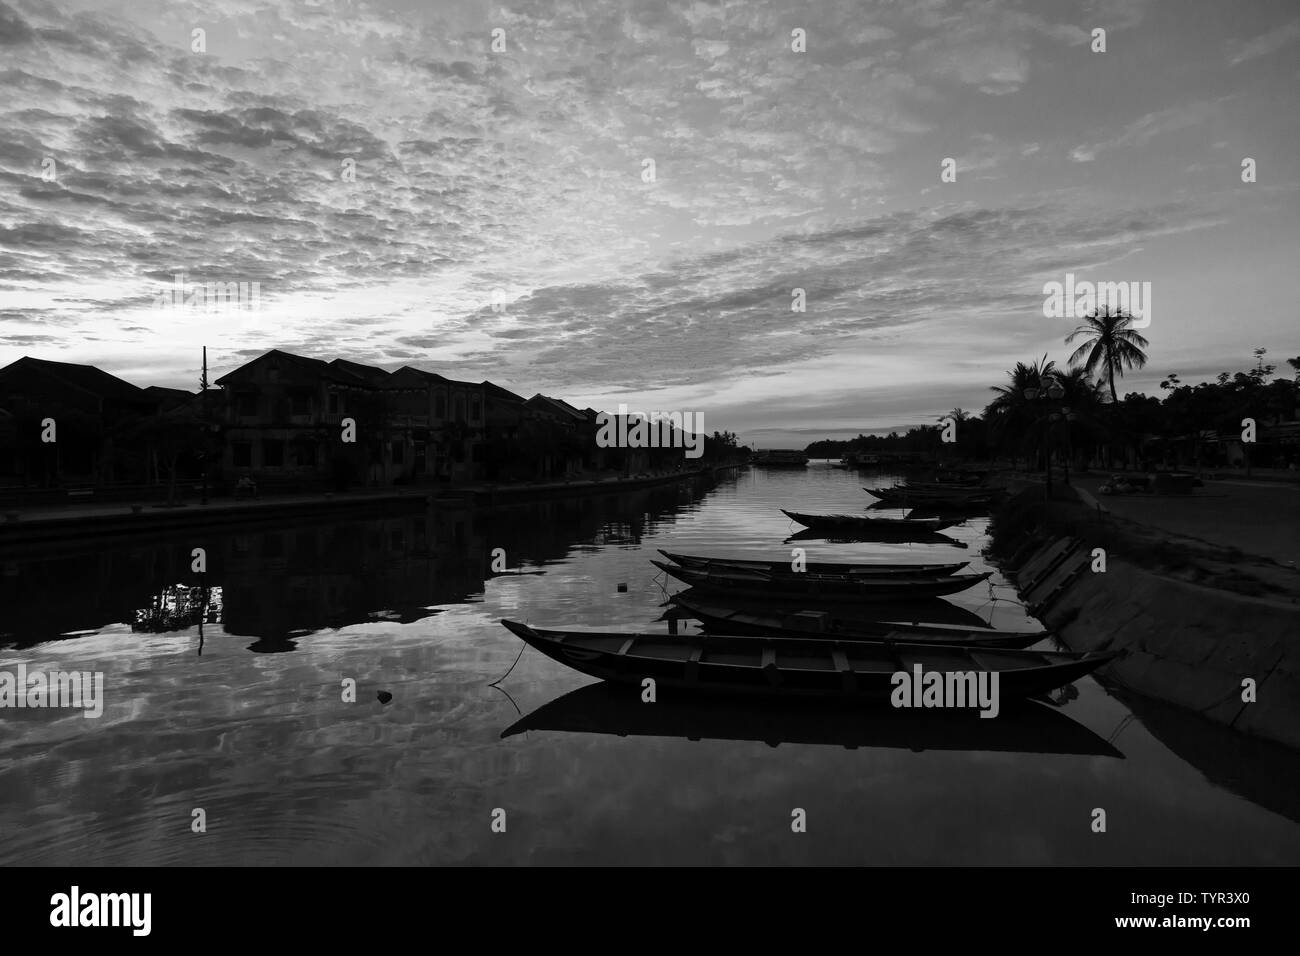 Early morning scene at Hoi An old town river canal.  Vietnam. Stock Photo